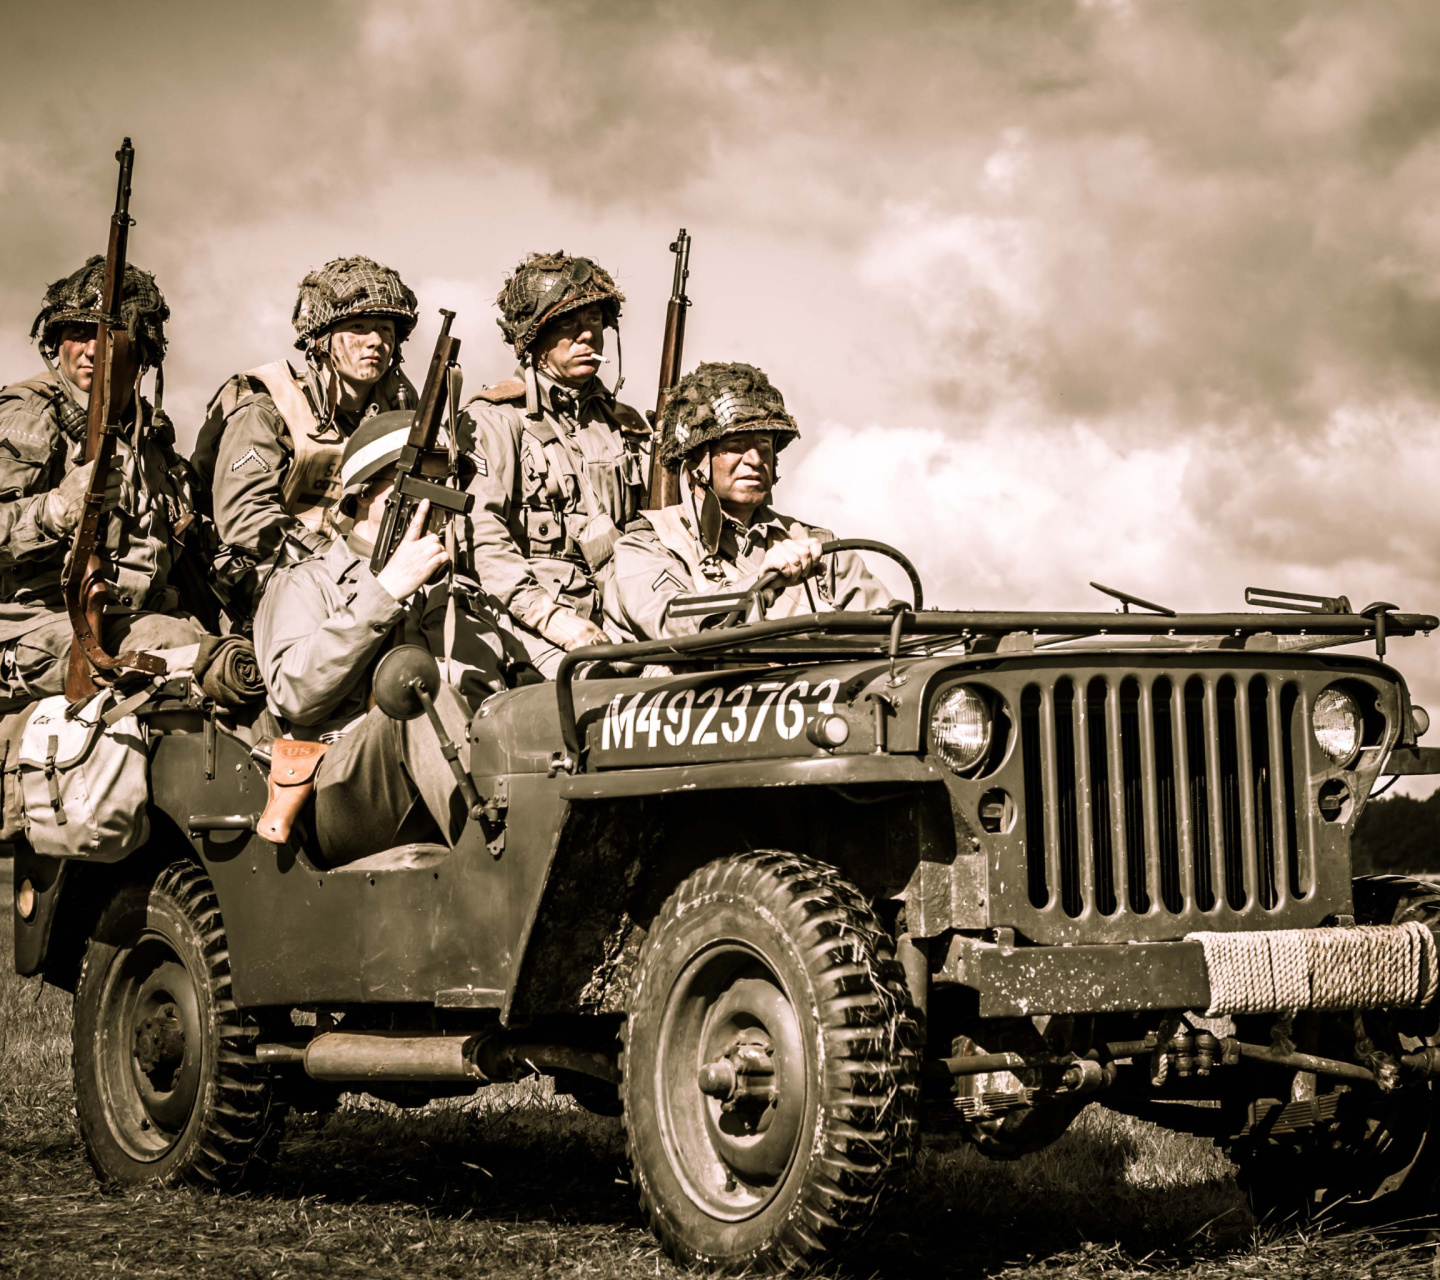 Das Soldiers on Jeep Wallpaper 1440x1280